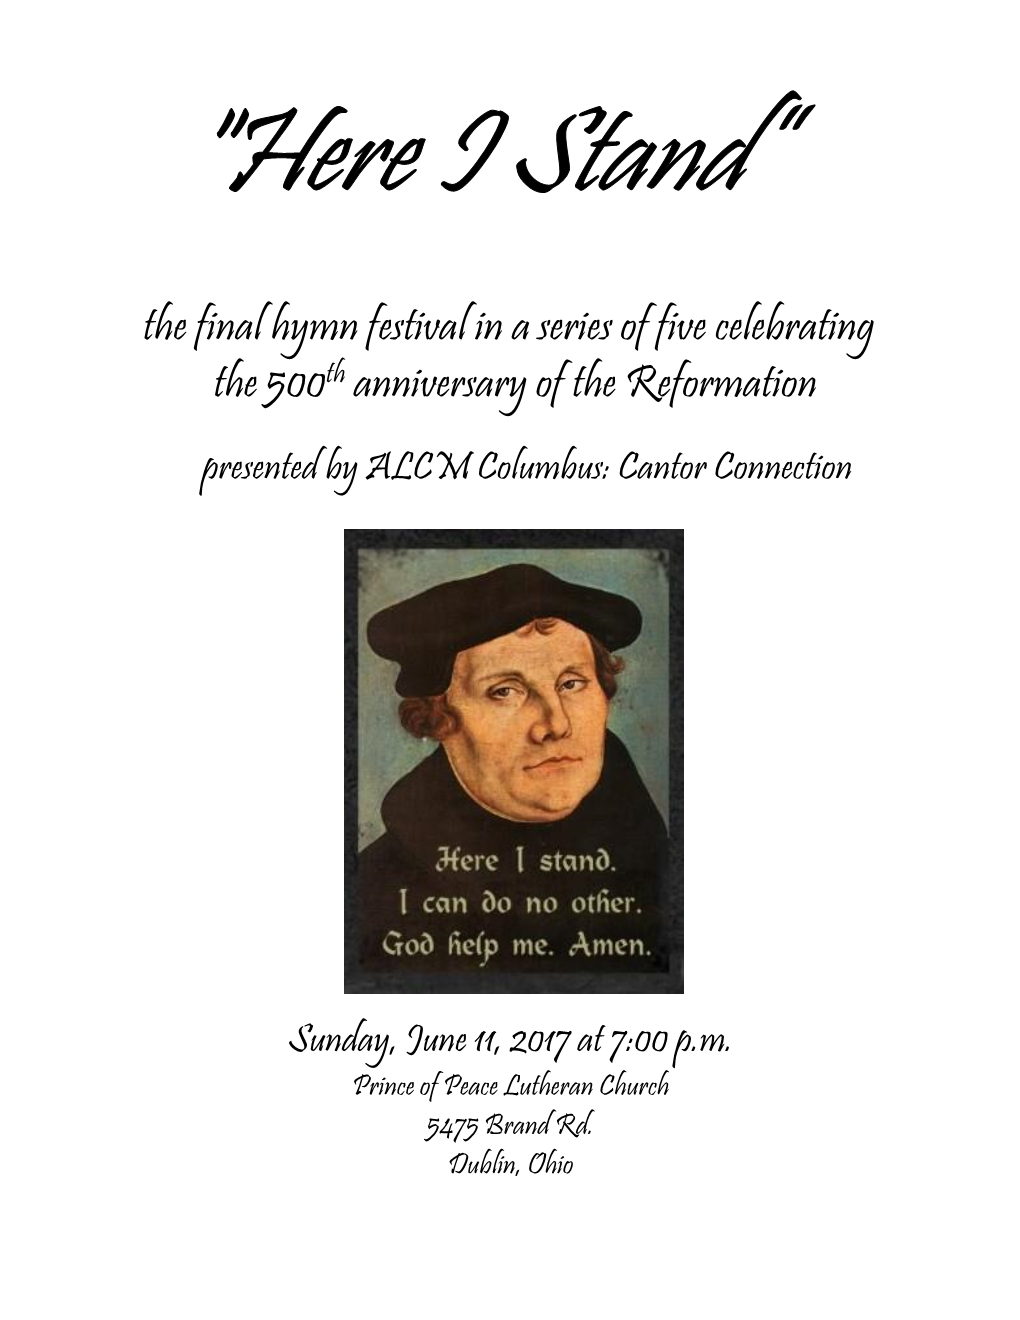 The Final Hymn Festival in a Series of Five Celebrating the 500Th